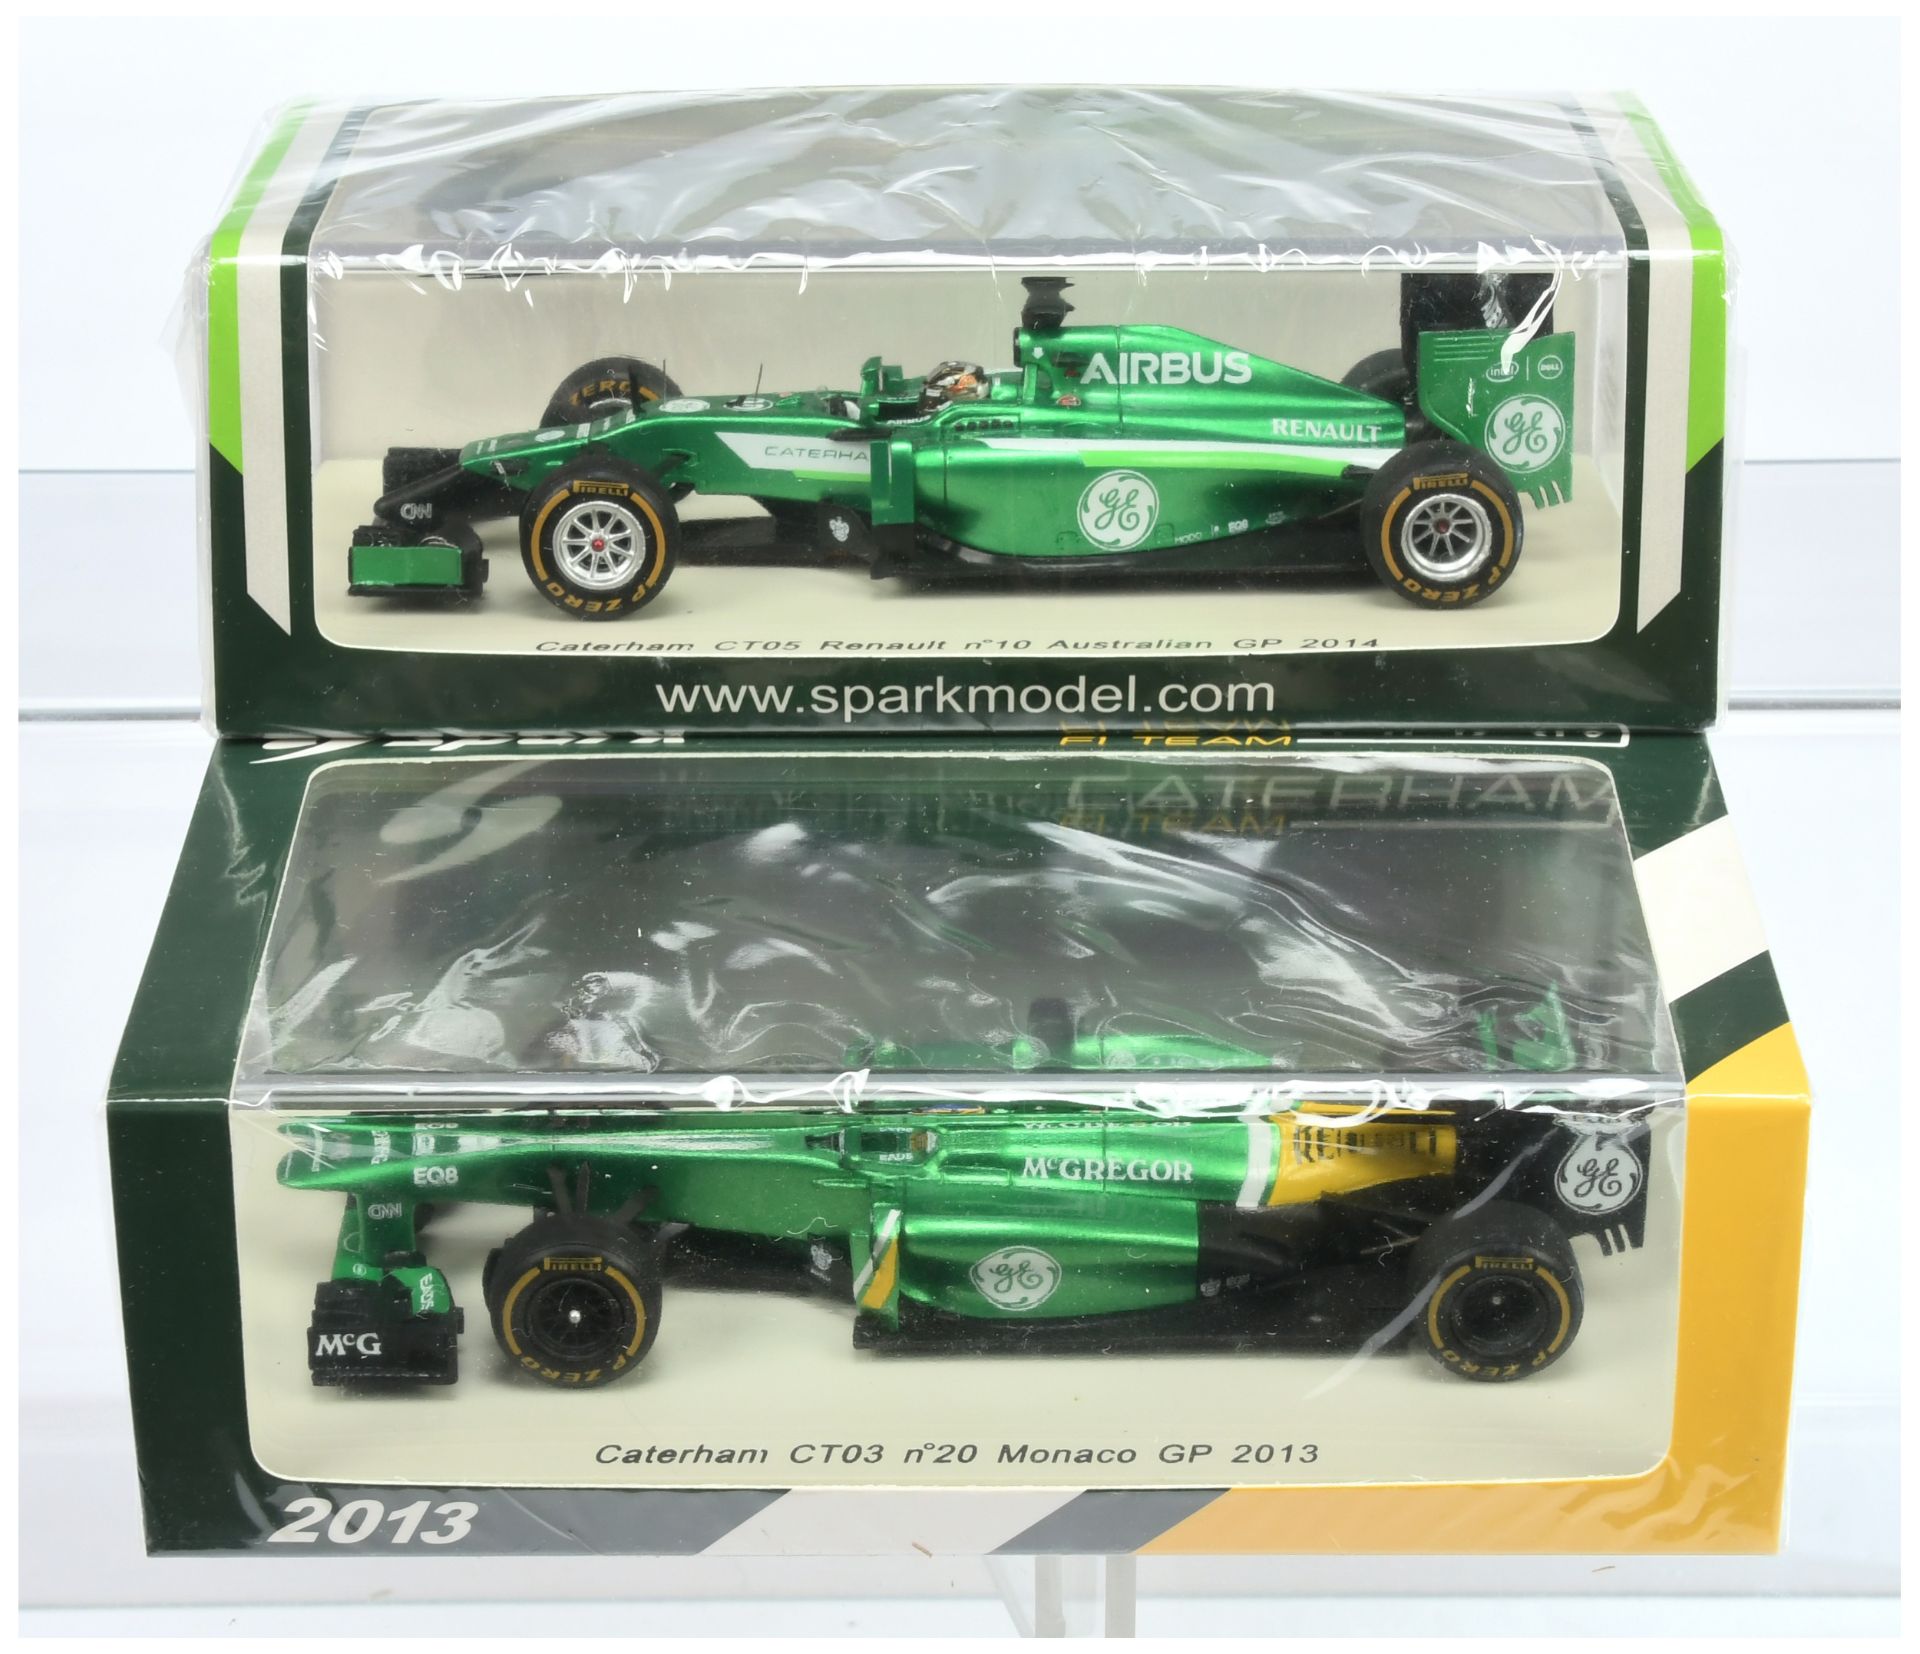 Spark Model (1/43rd) A Pair - (1) S3063 Caterham CT03 "Monaco 2013 and (2) S3078 Caterham CT05 "A...